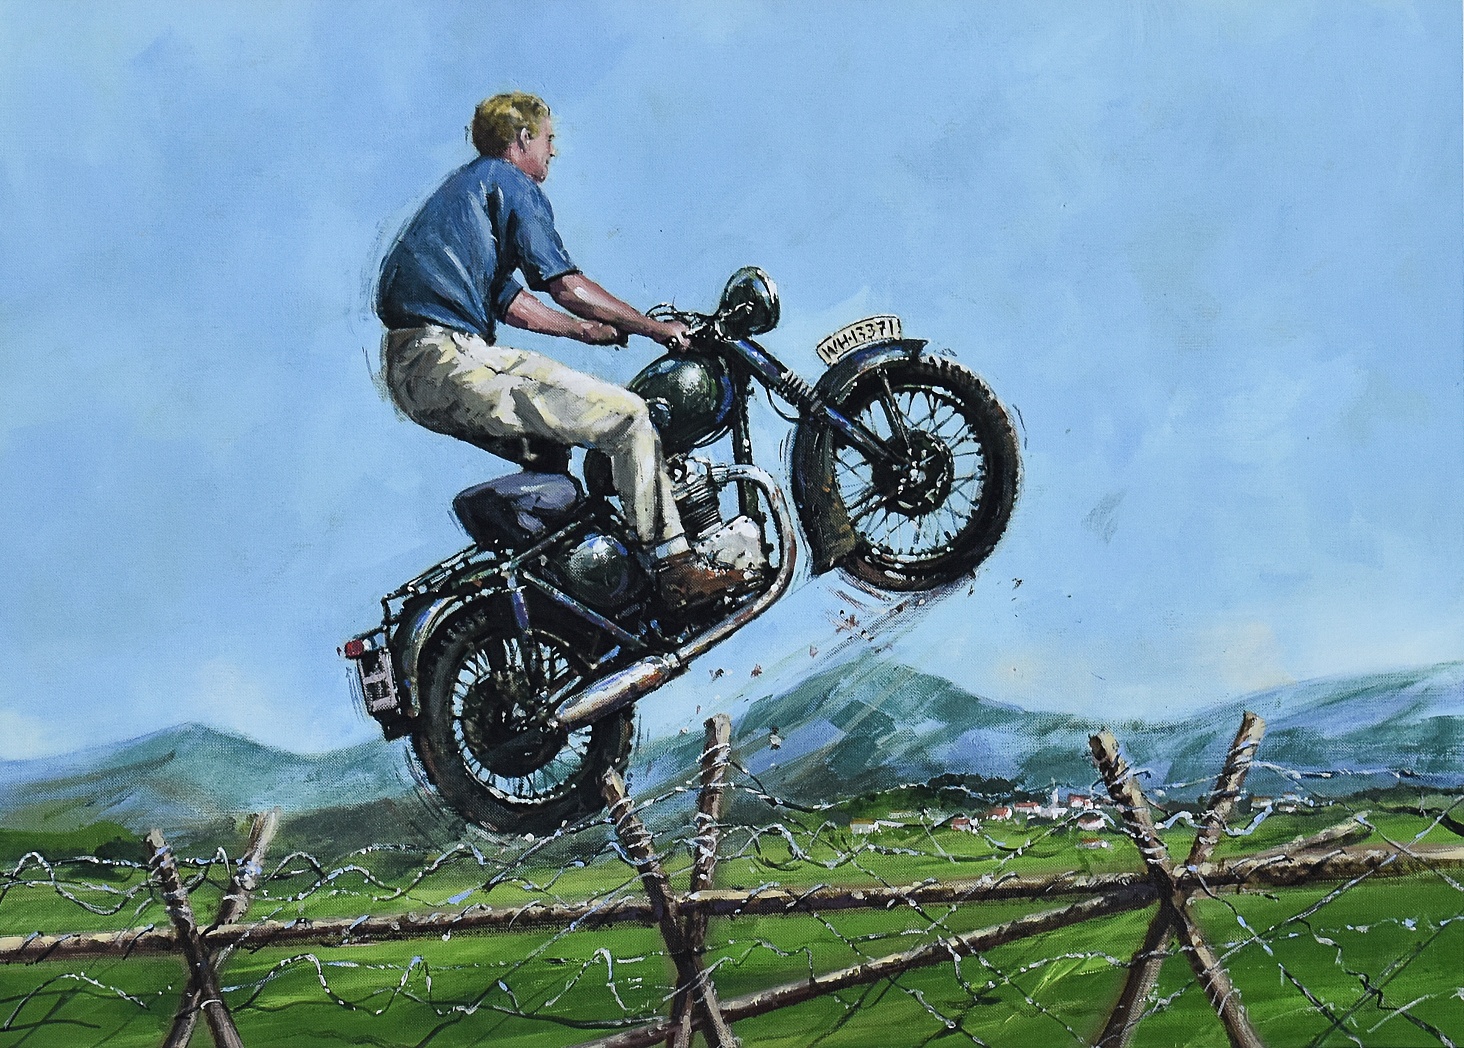 The Great Escape – Framed Collector’s Piece by Nicholas Watts